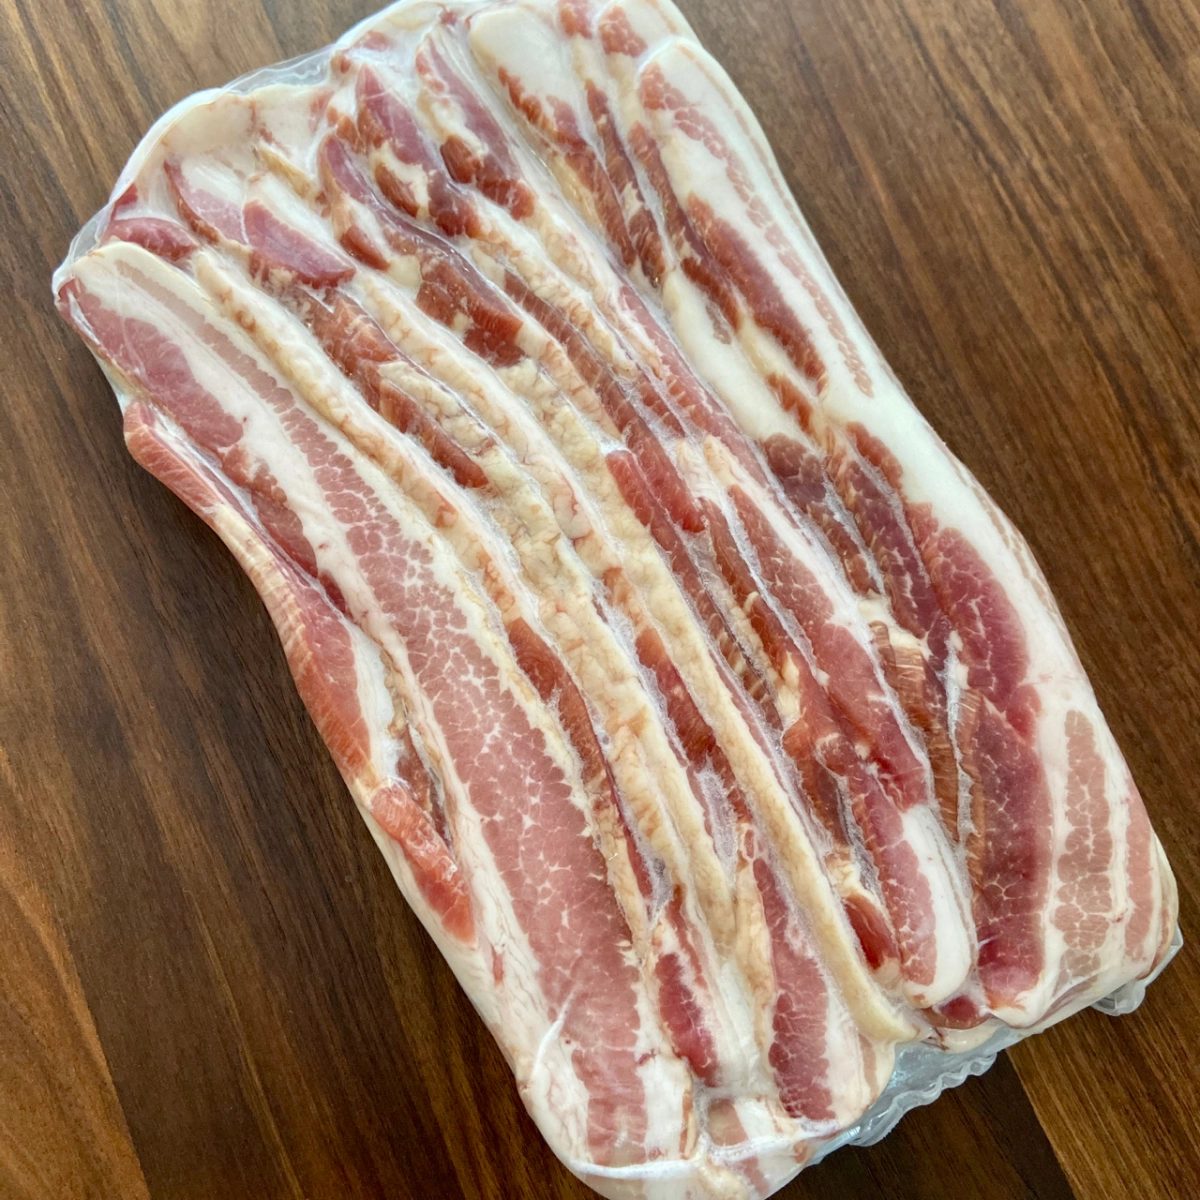 thickcut-bacon-hickory-smoked-1-lb-package